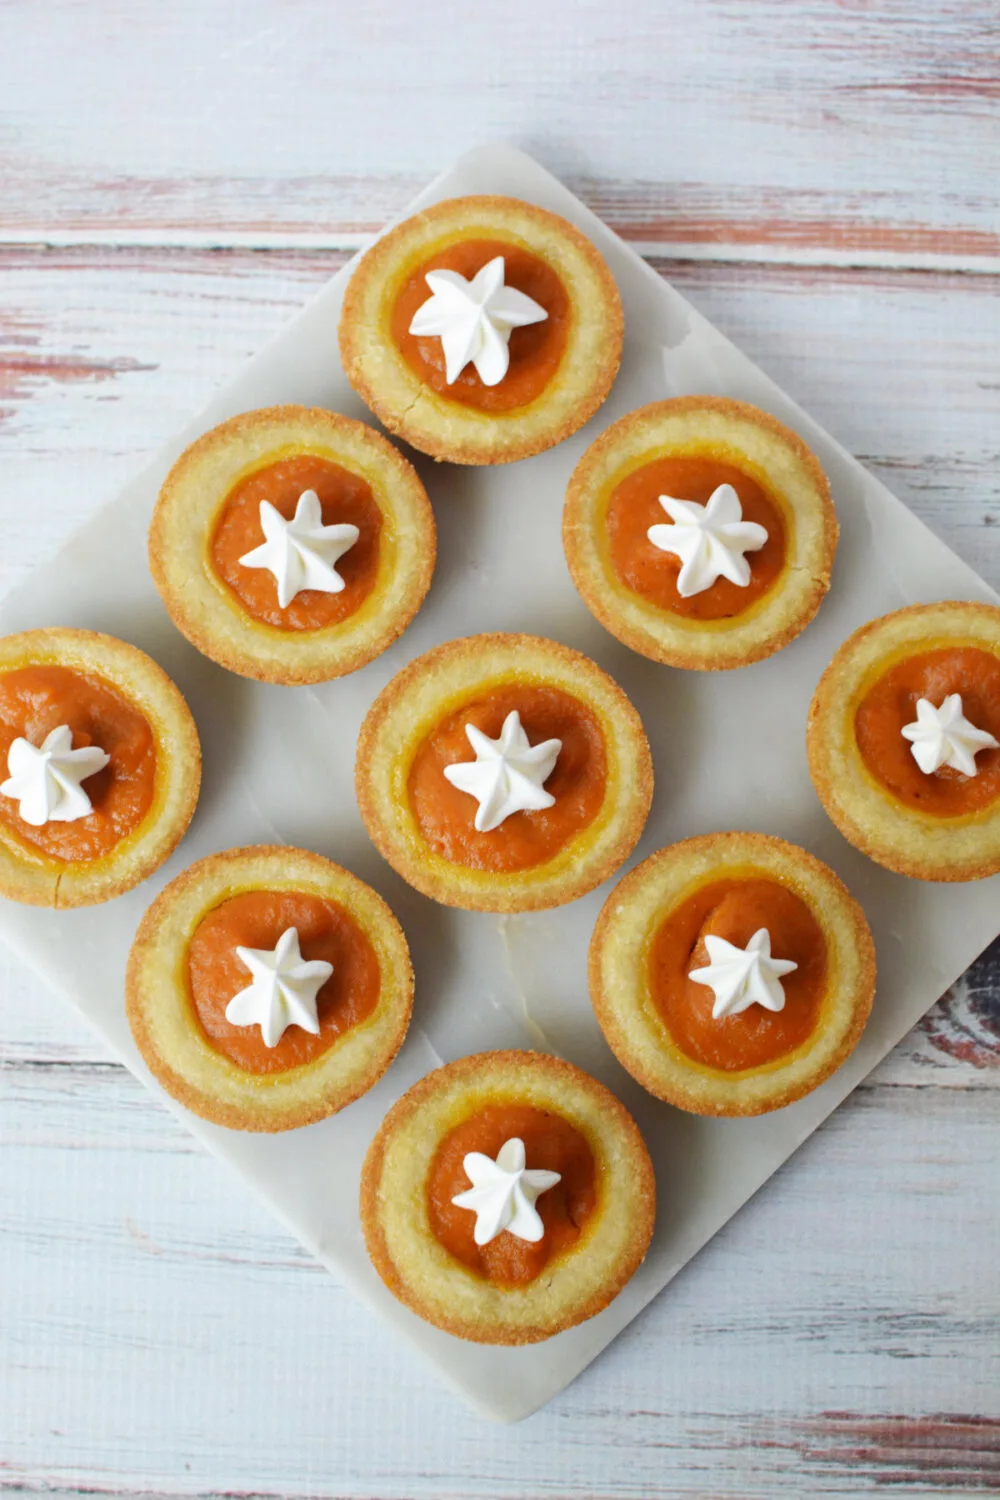 Mini pumpkin pies in sugar cookie crusts with whipped cream toppings.